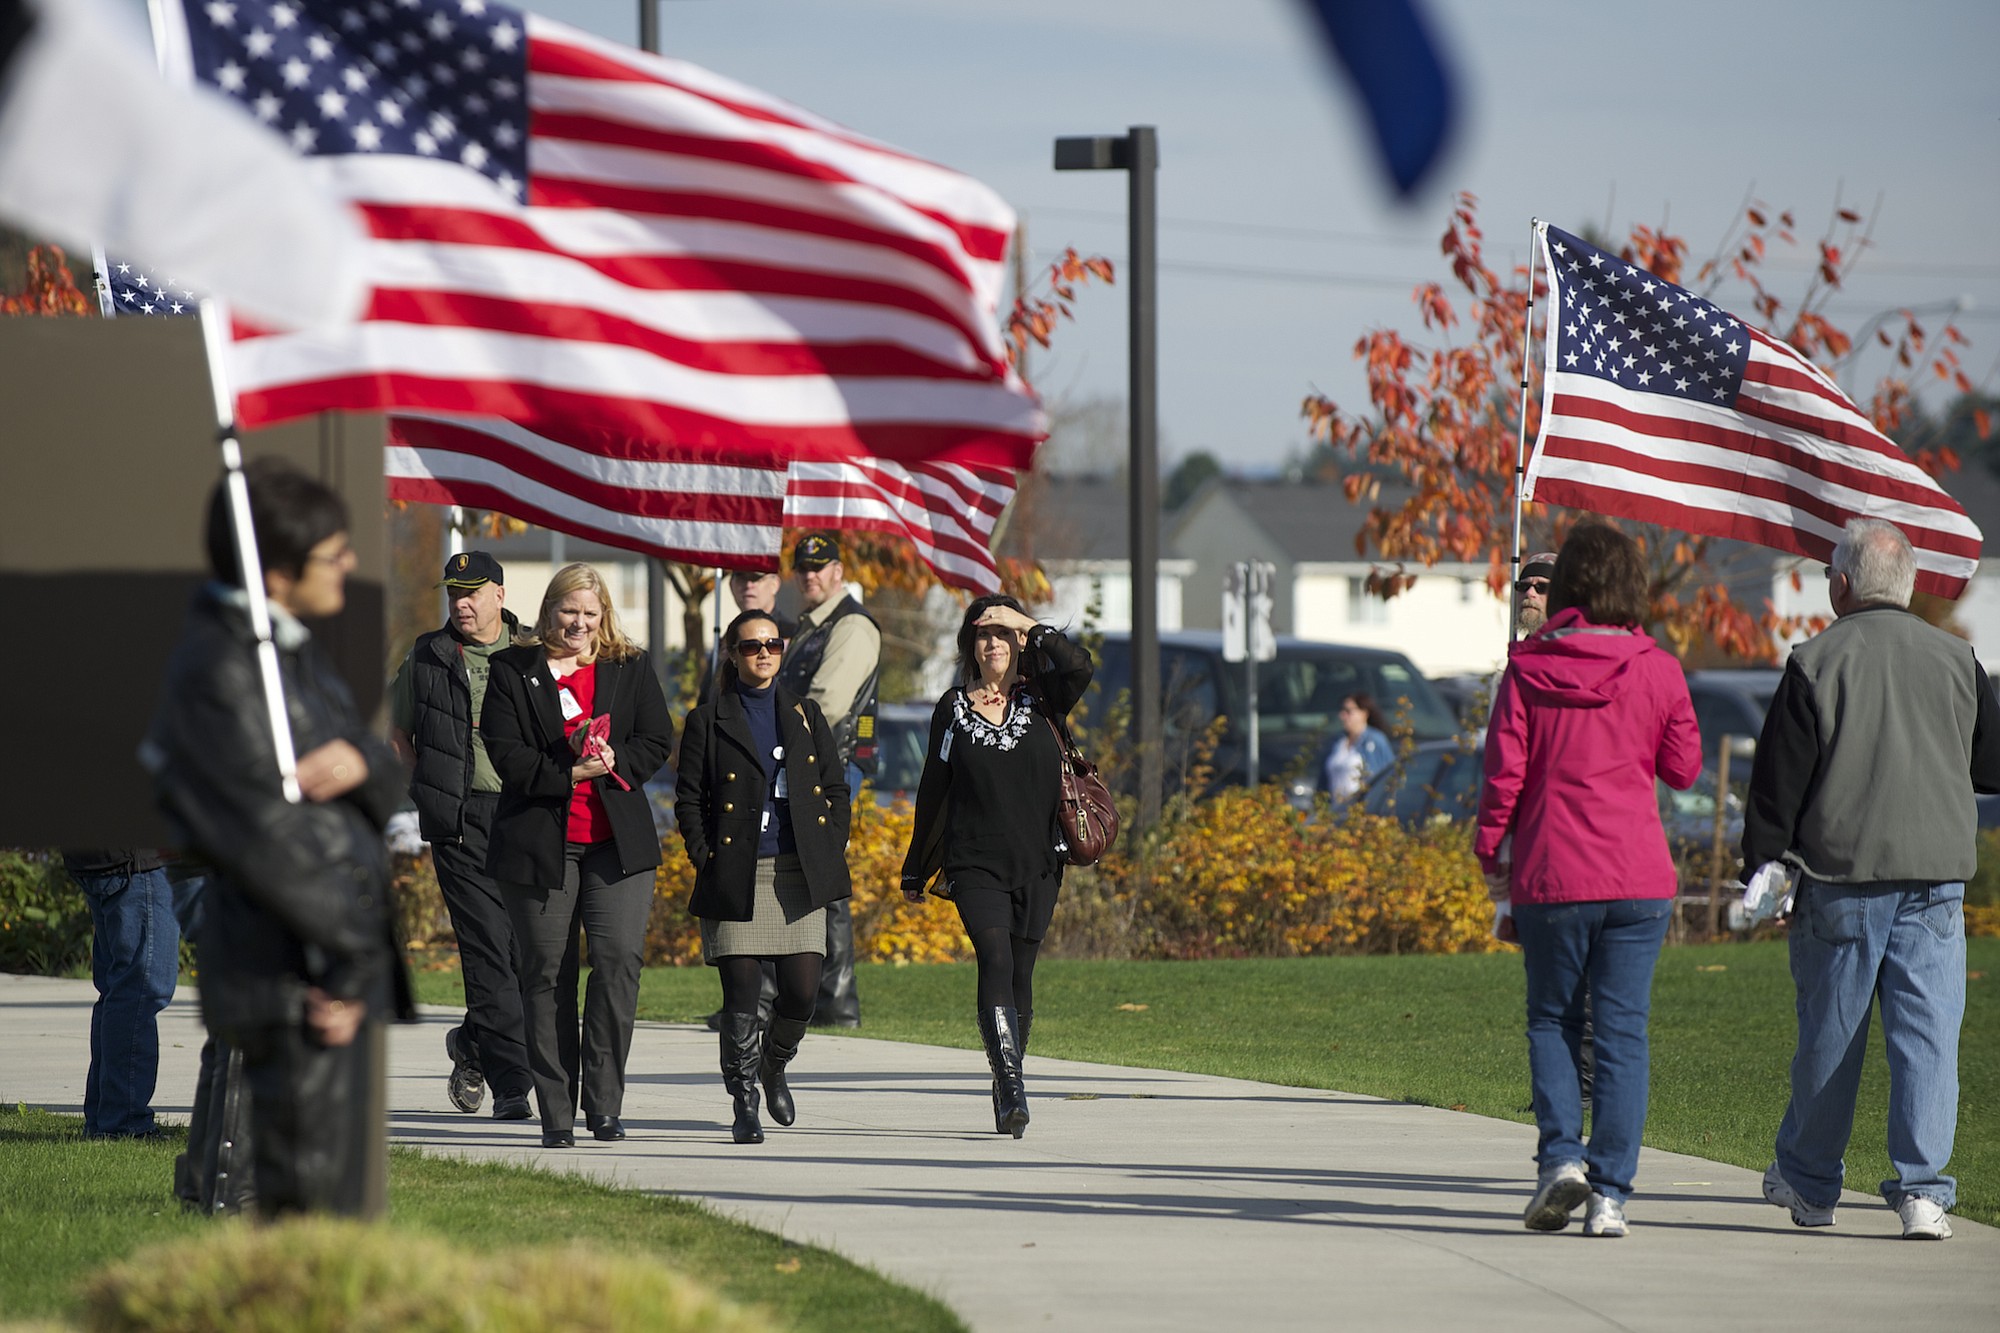 American flags lining the walkway greet people at the Armed Forces Reserve Center during 2013's Veterans Day Celebration.